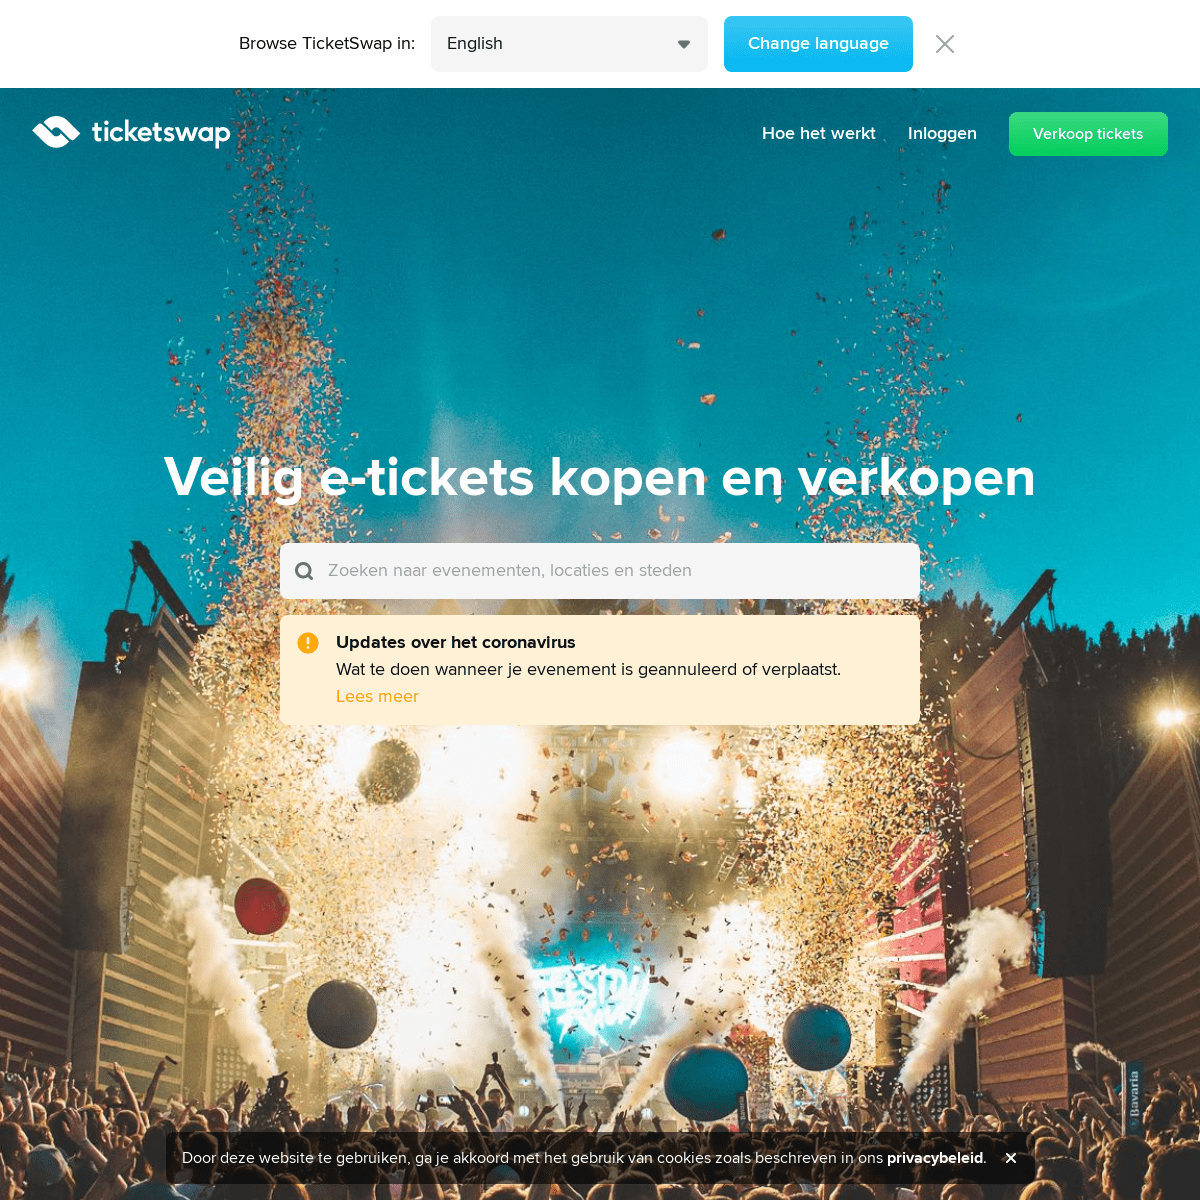 A complete backup of ticketswap.nl